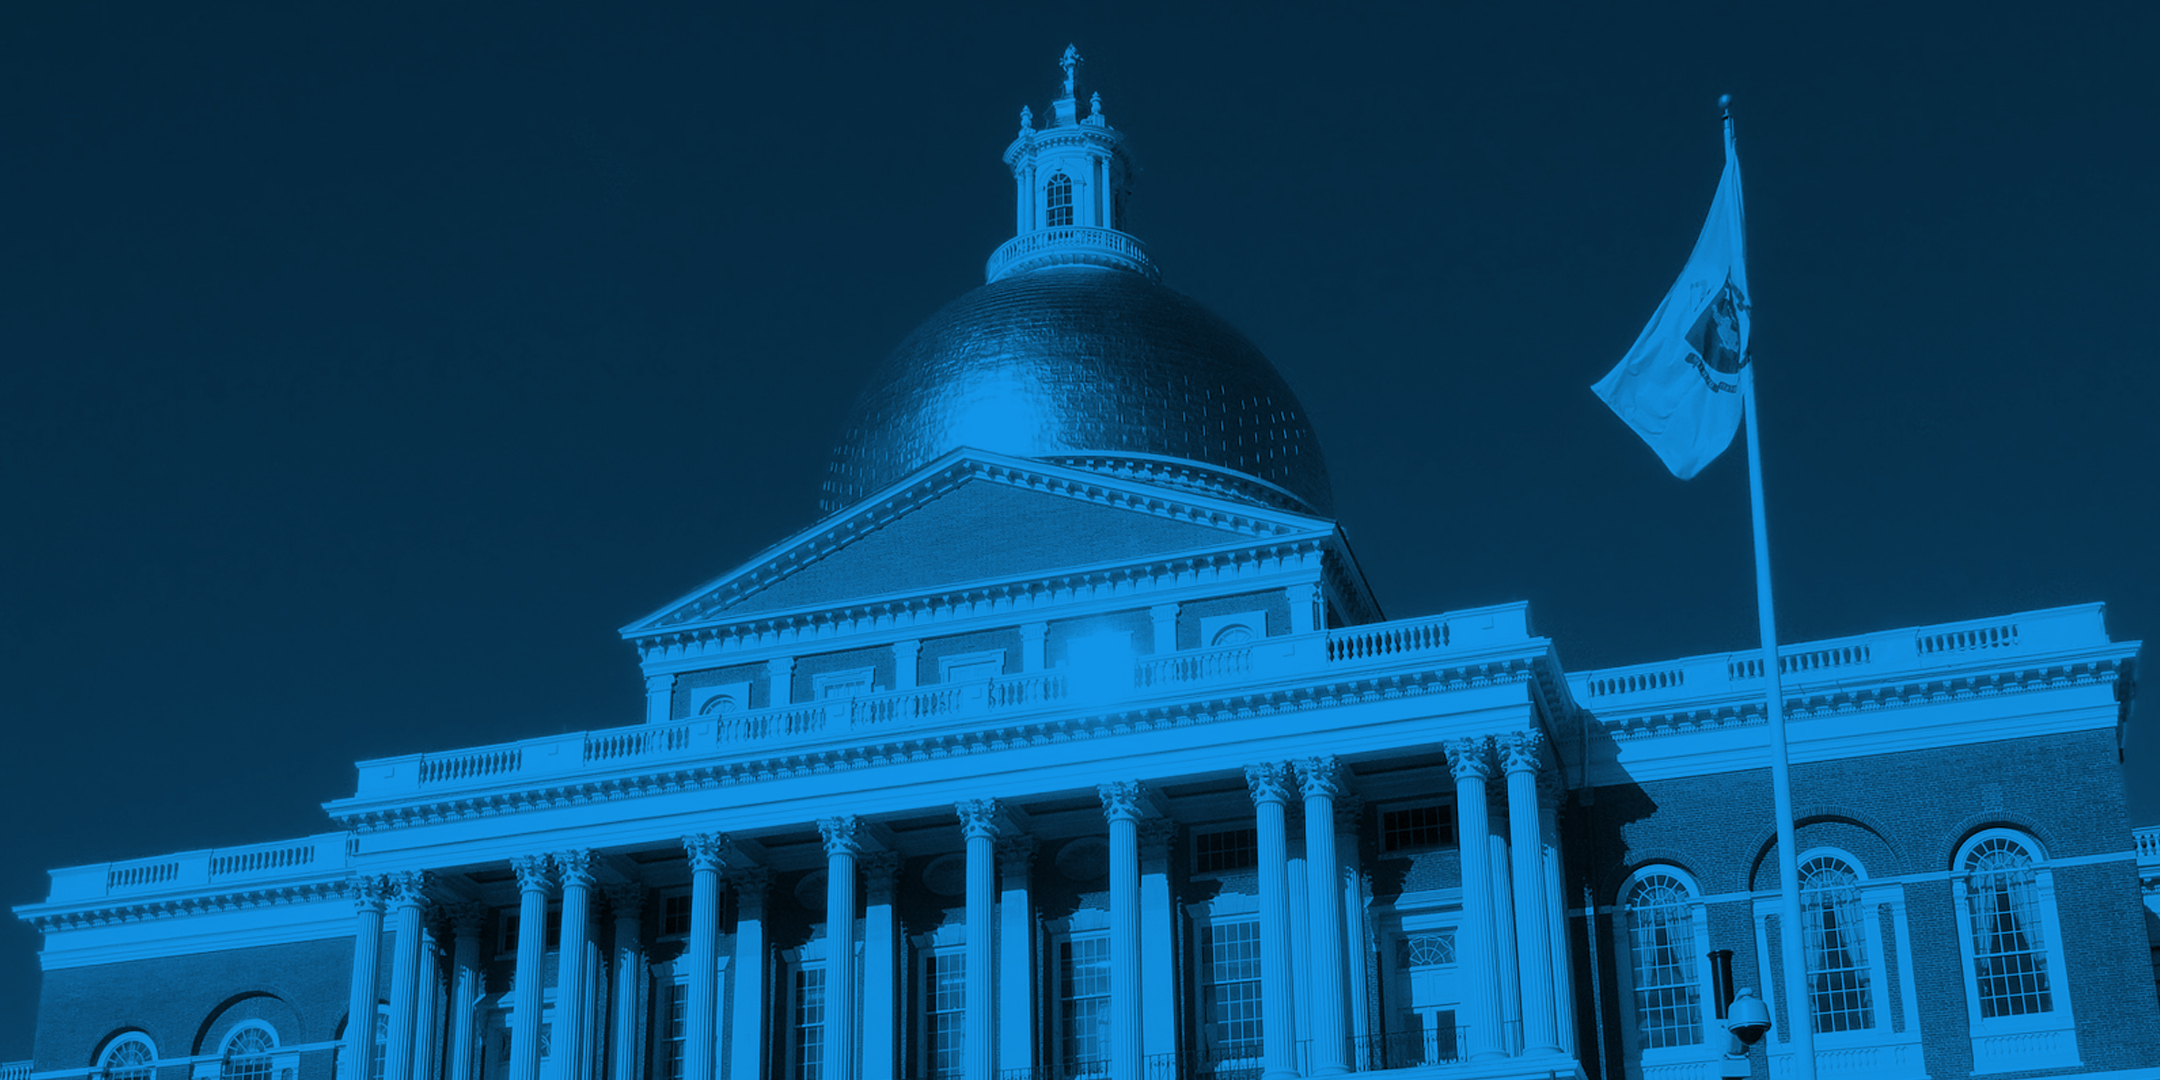 Photograph of the Massachusetts State House with Blue Overlay